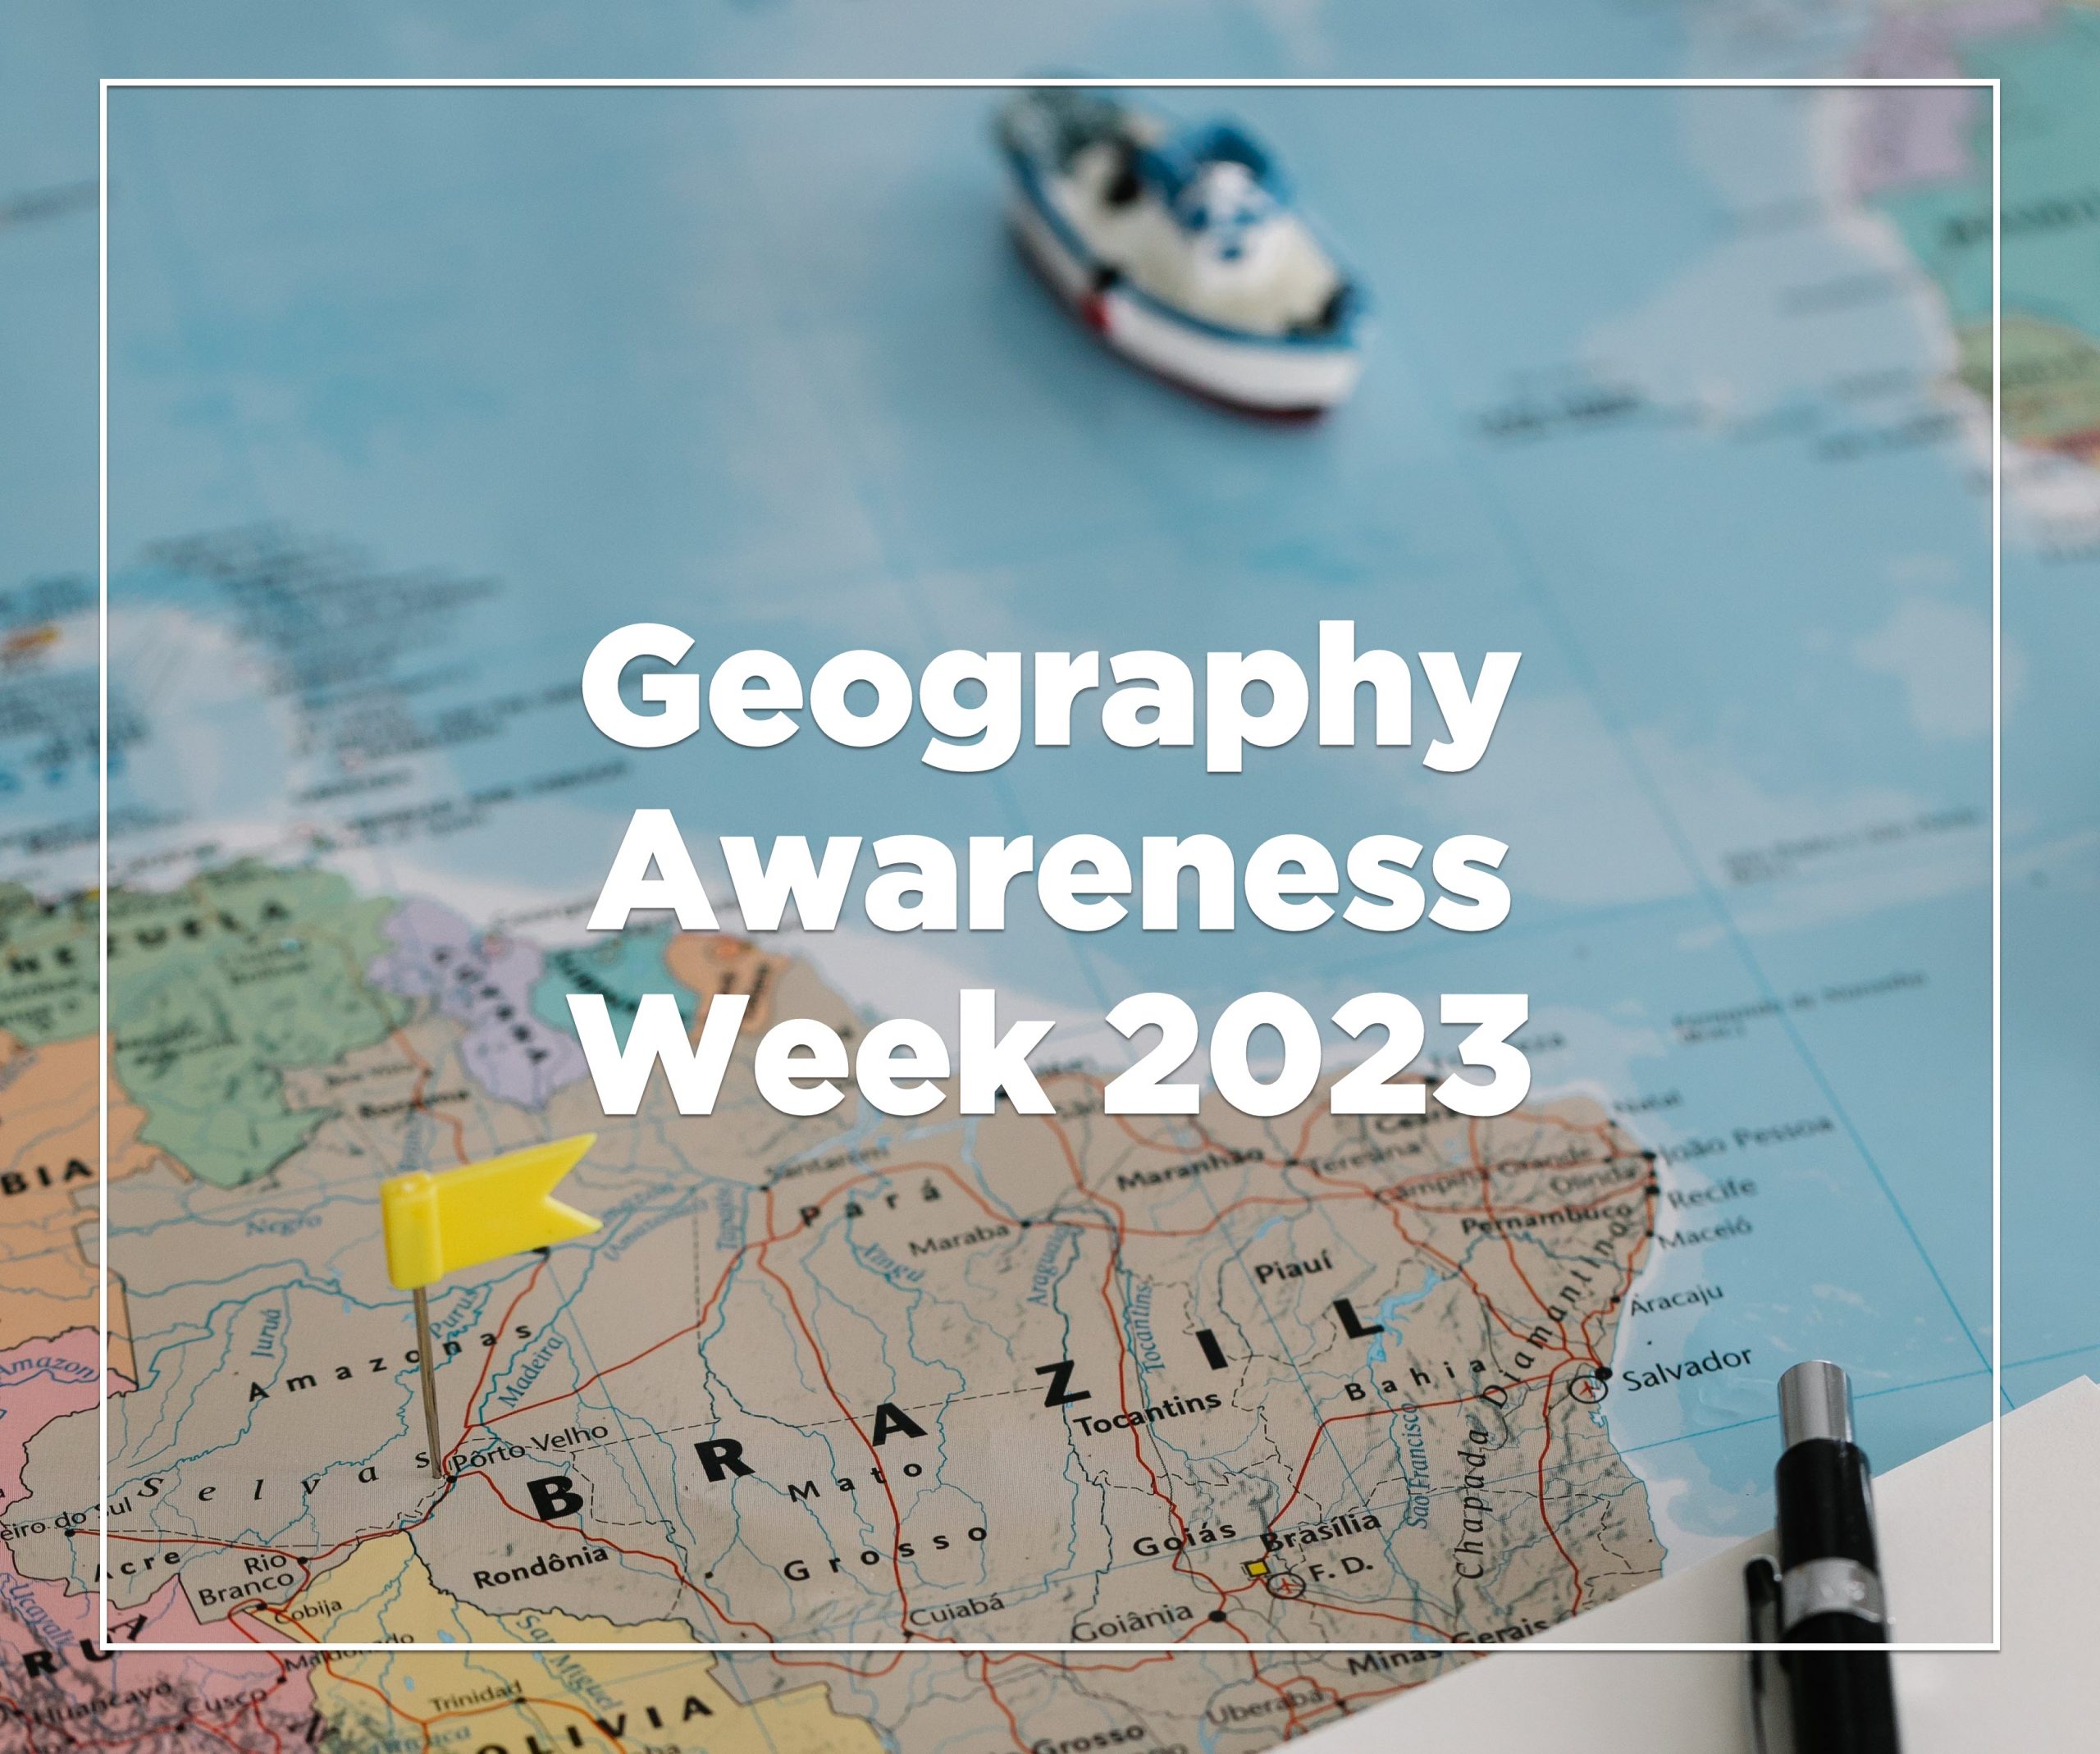 Graphic for Geography Awareness Week 2023 showing a map and model boat in the background